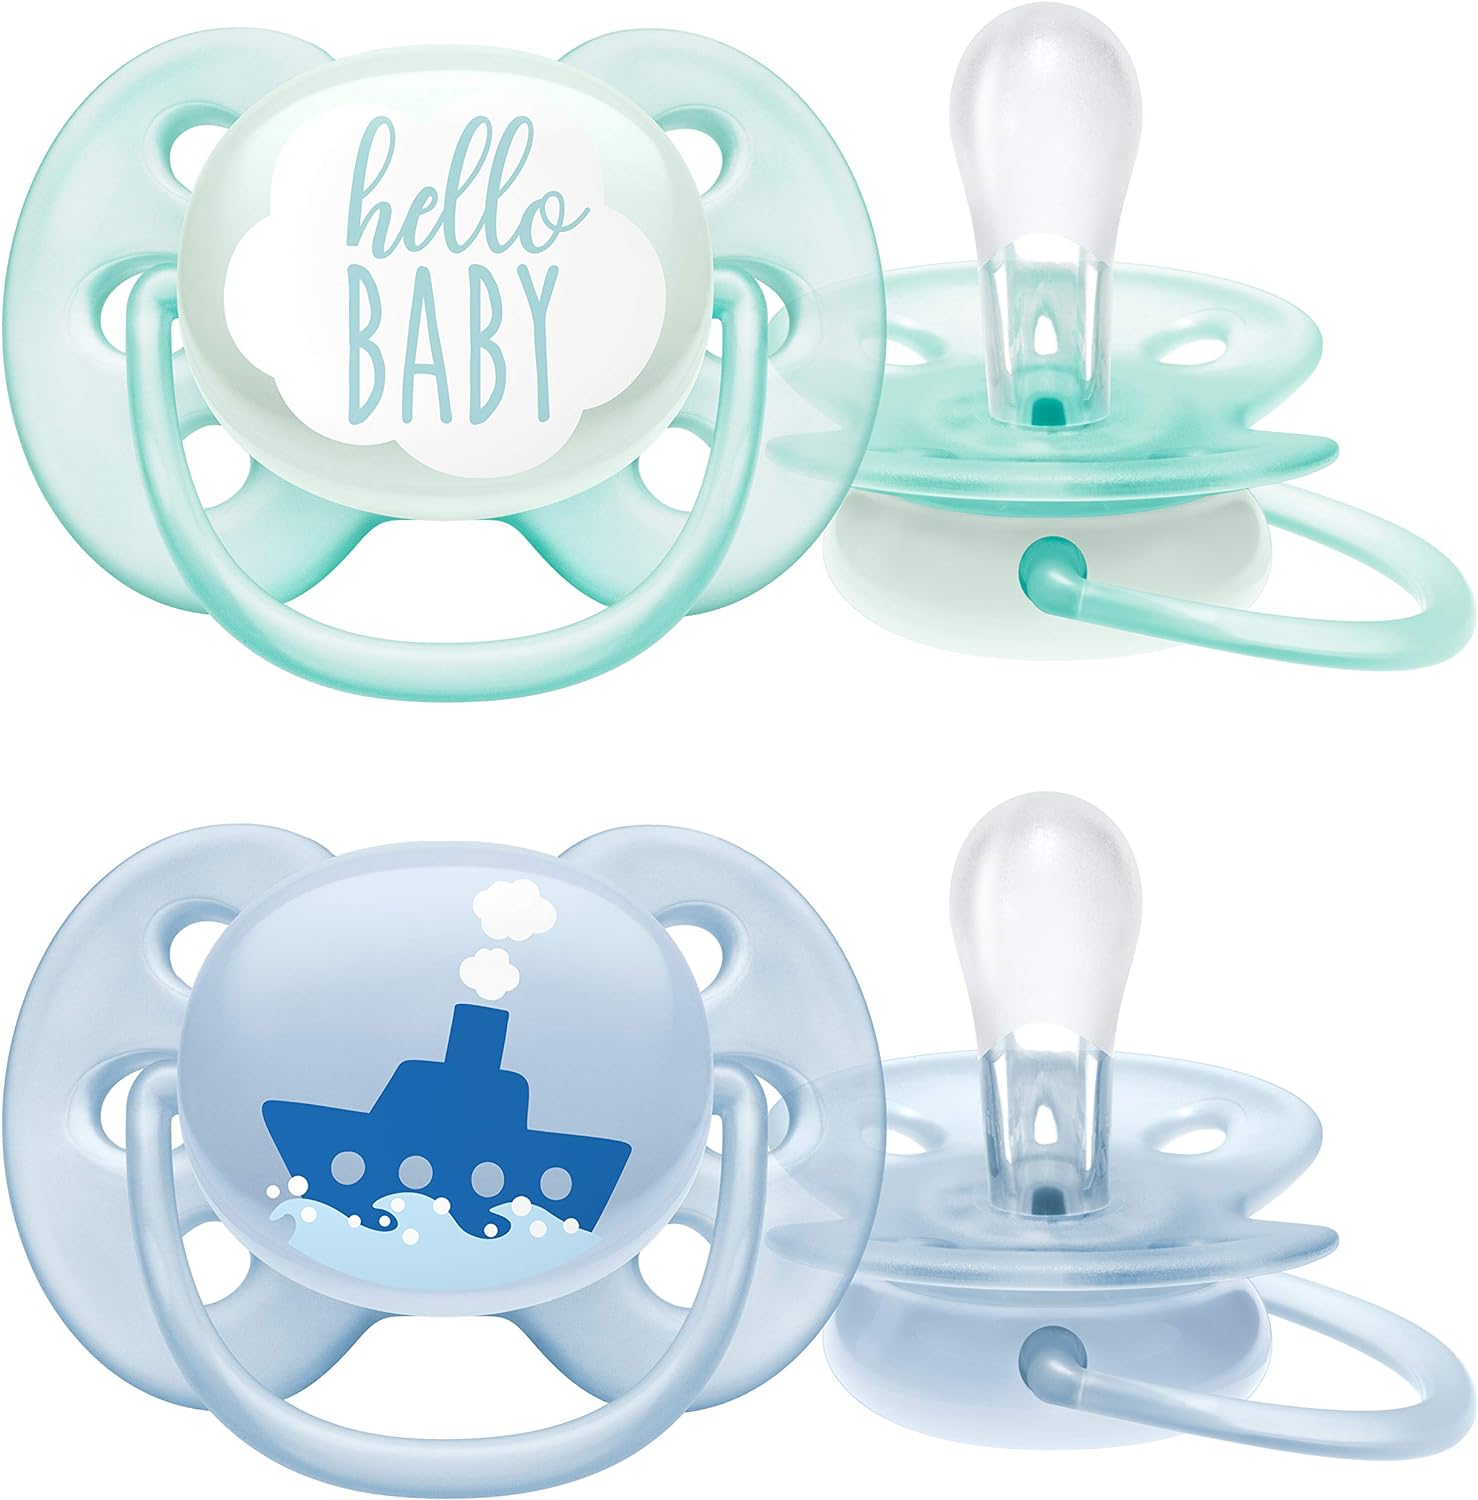 Philips Avent STHR SIL 6-18M Ultra Soft X 2 Girl